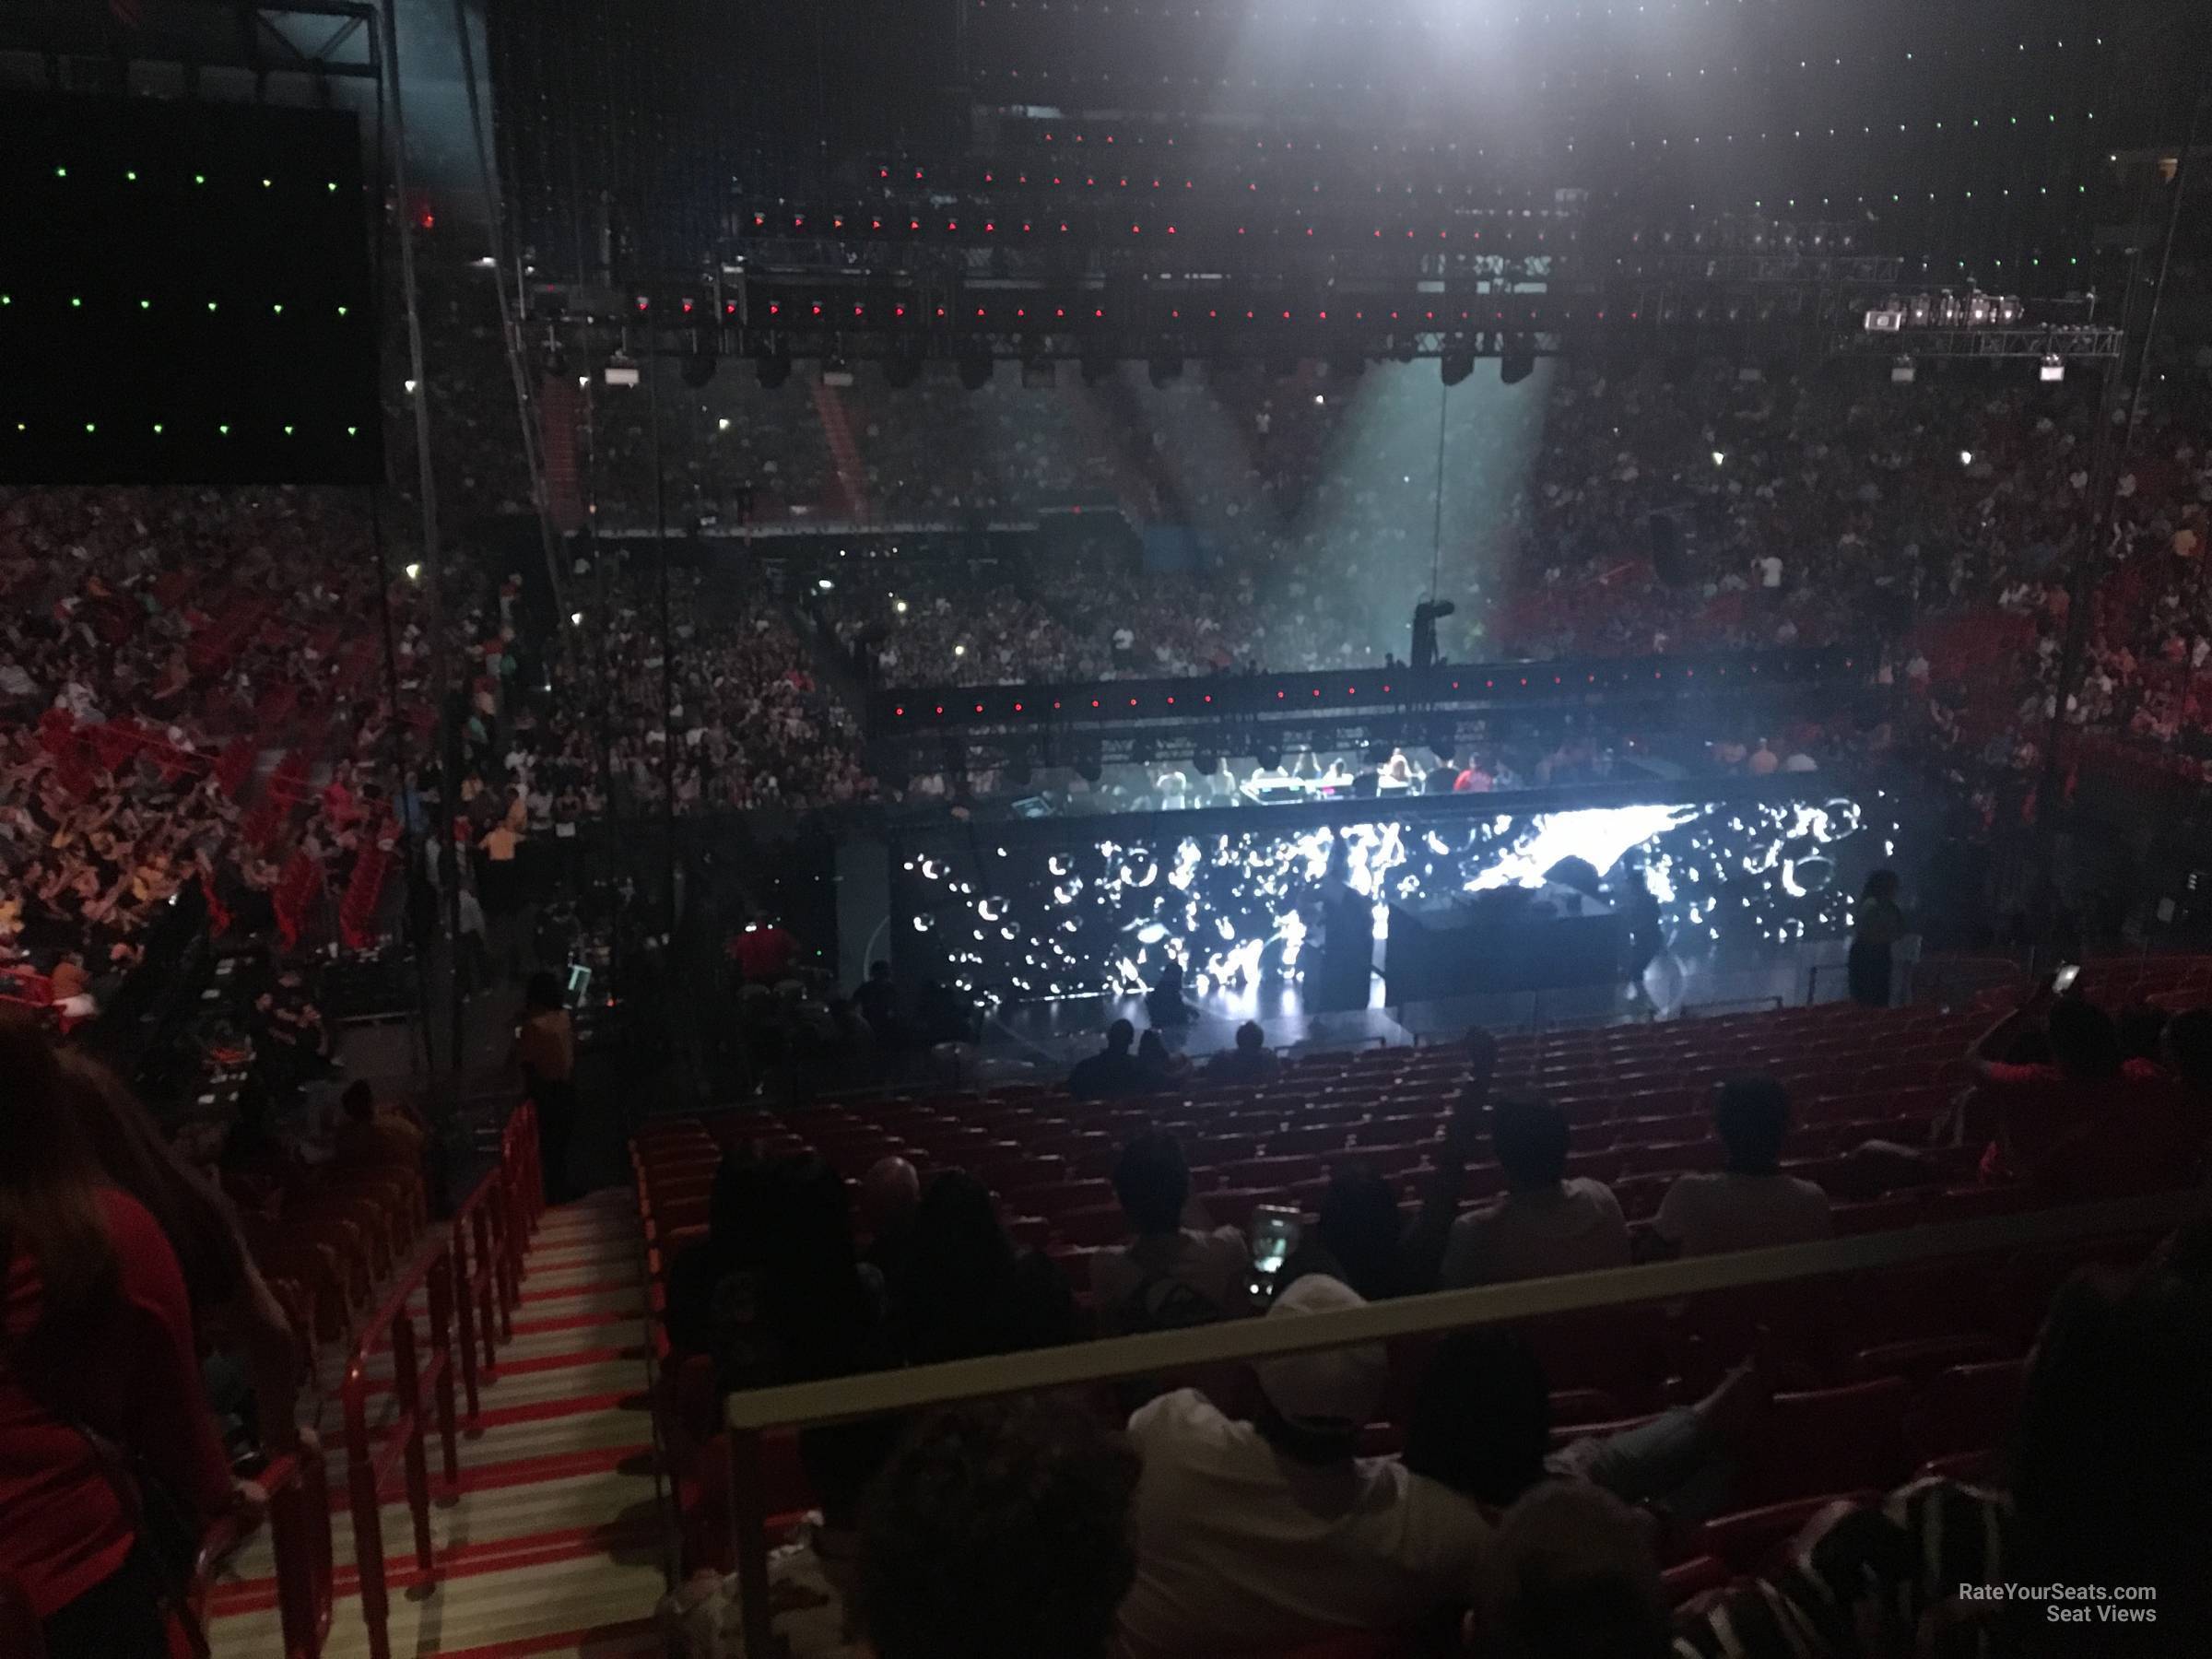 section 102, row 37 seat view  for concert - miami-dade arena